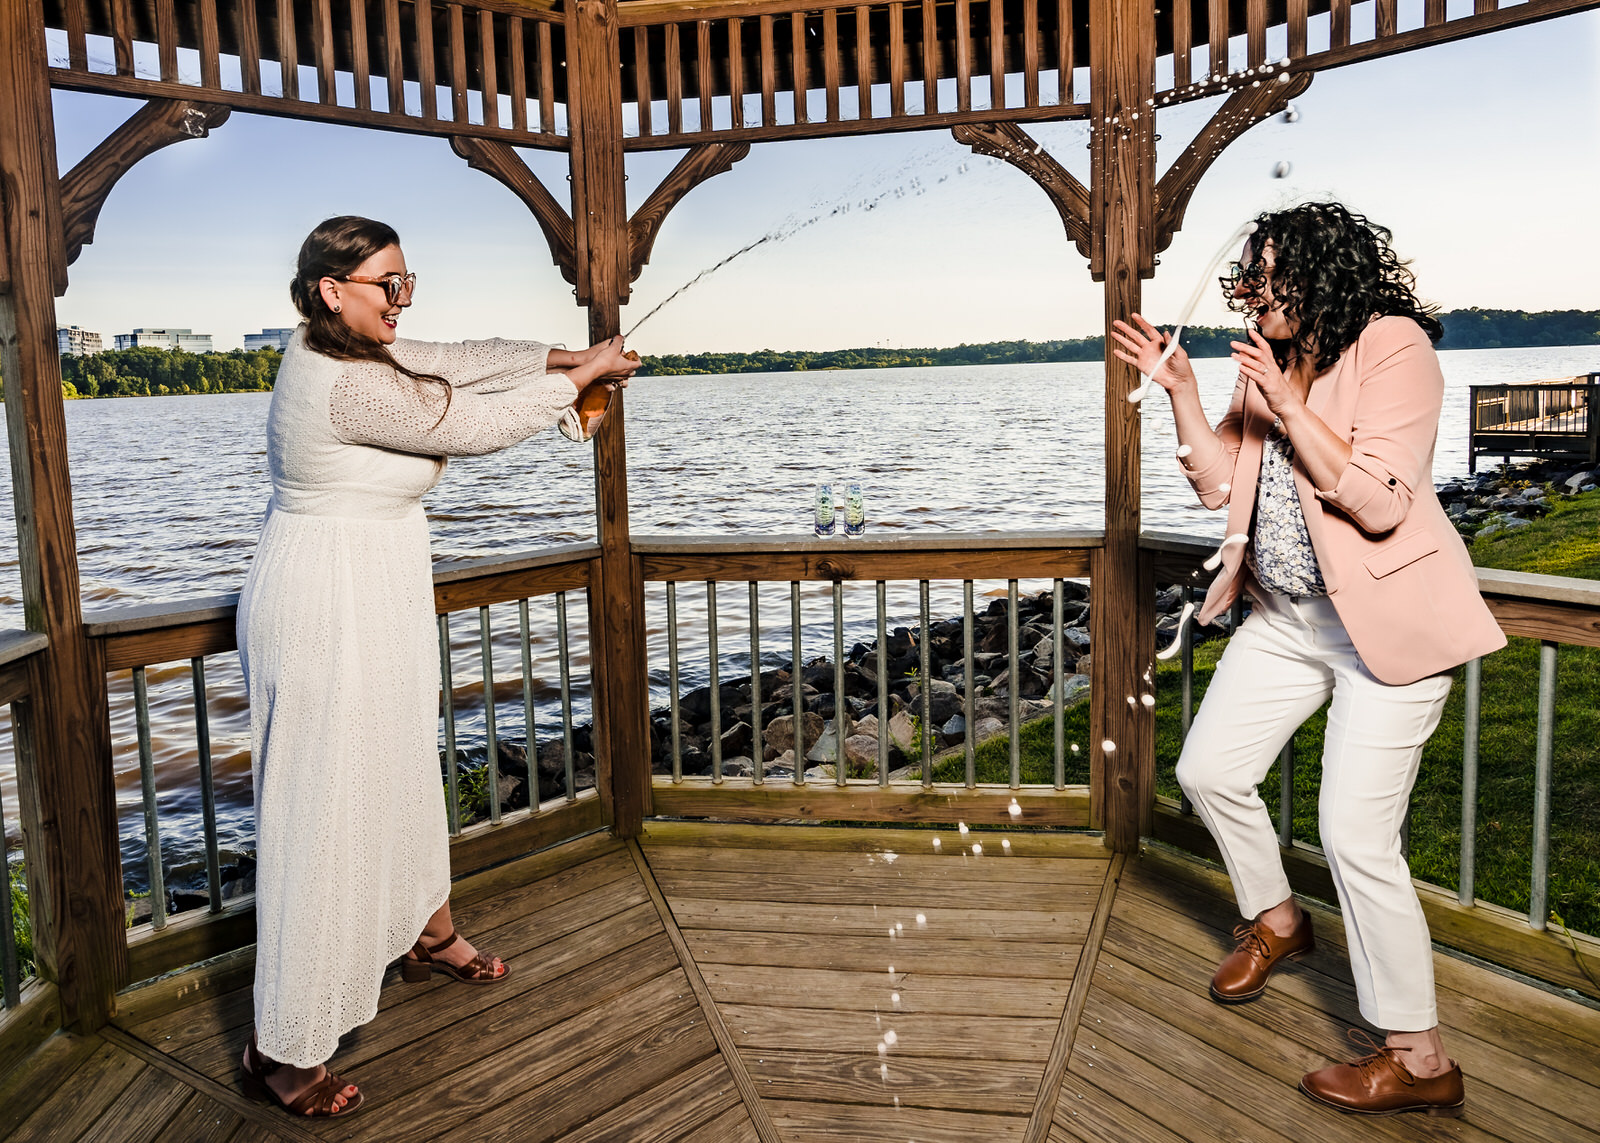 A woman pops champagne right after an intimate Raleigh elopement. Her new wife jumps to get out of the spray.